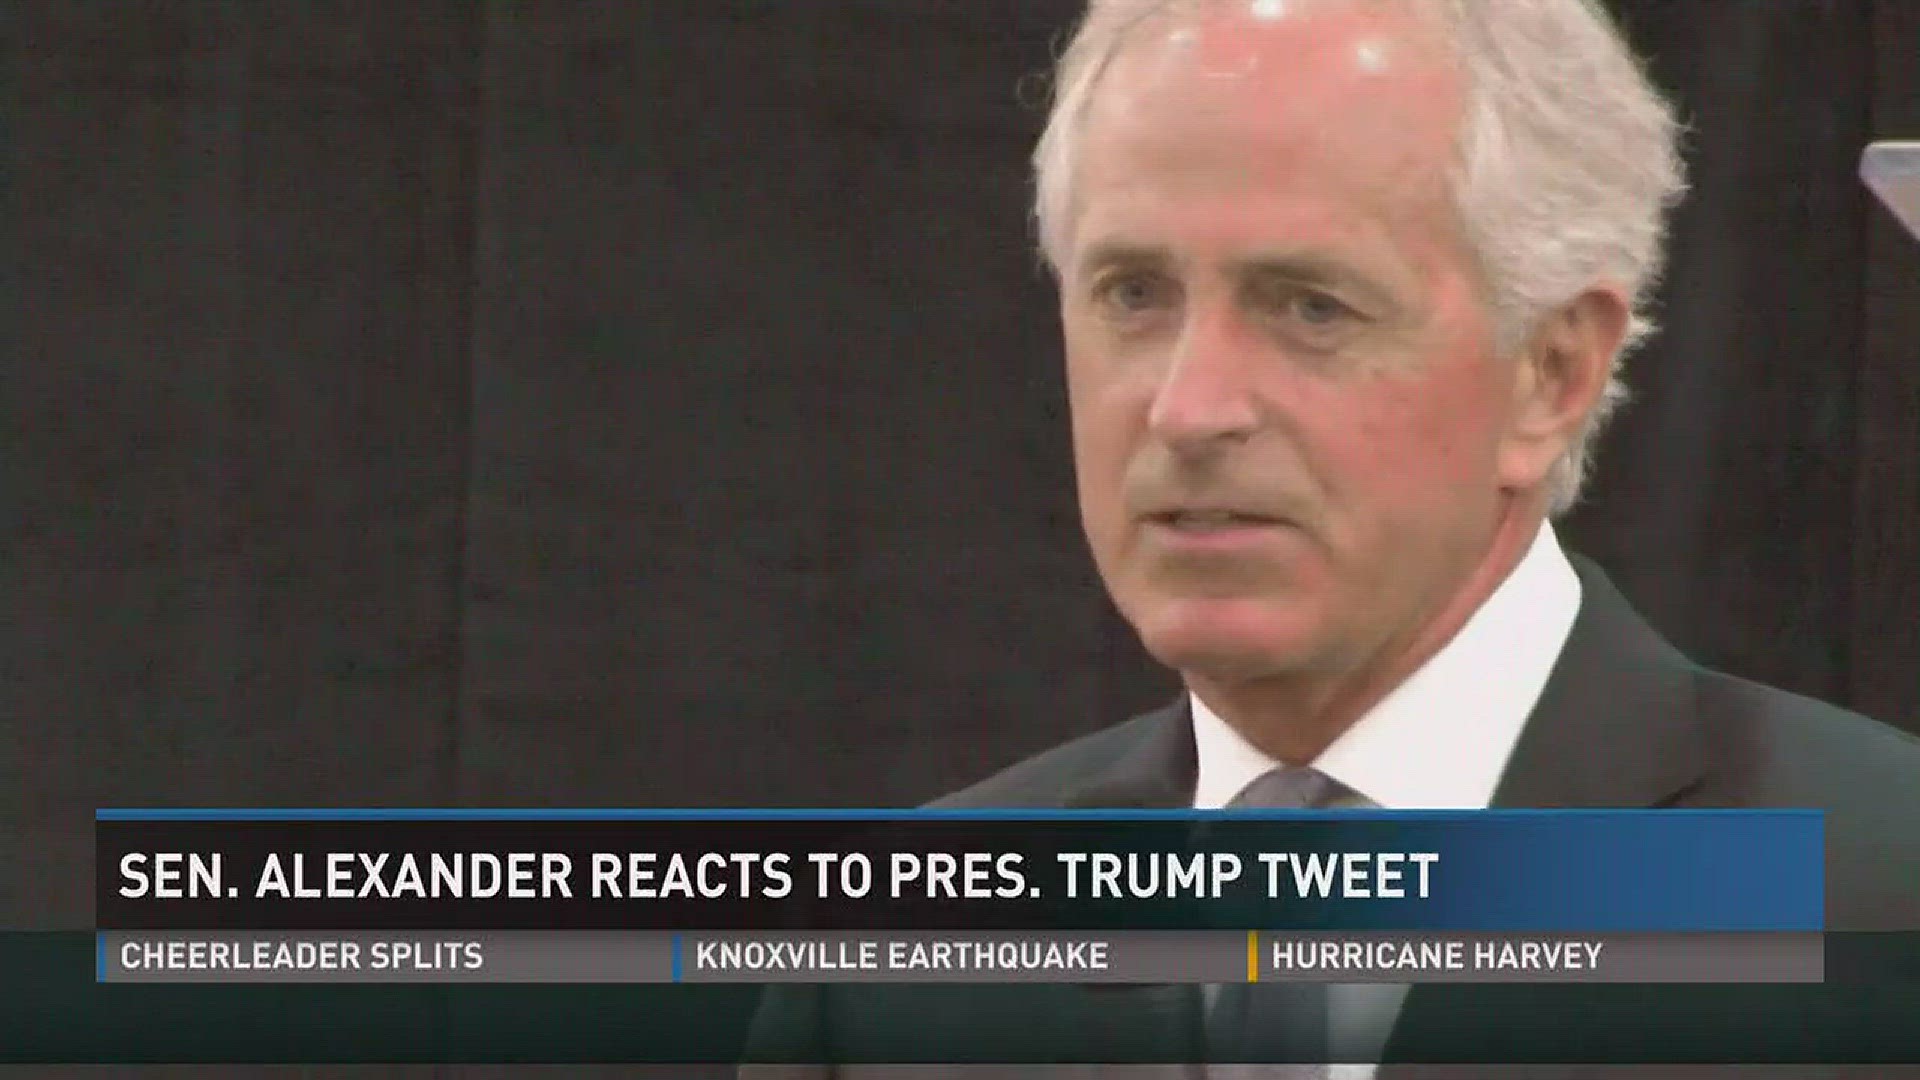 Aug. 25, 2017: President Donald Trump tweeted a response to Tennessee Sen. Bob Corker's comments about his competency as president.